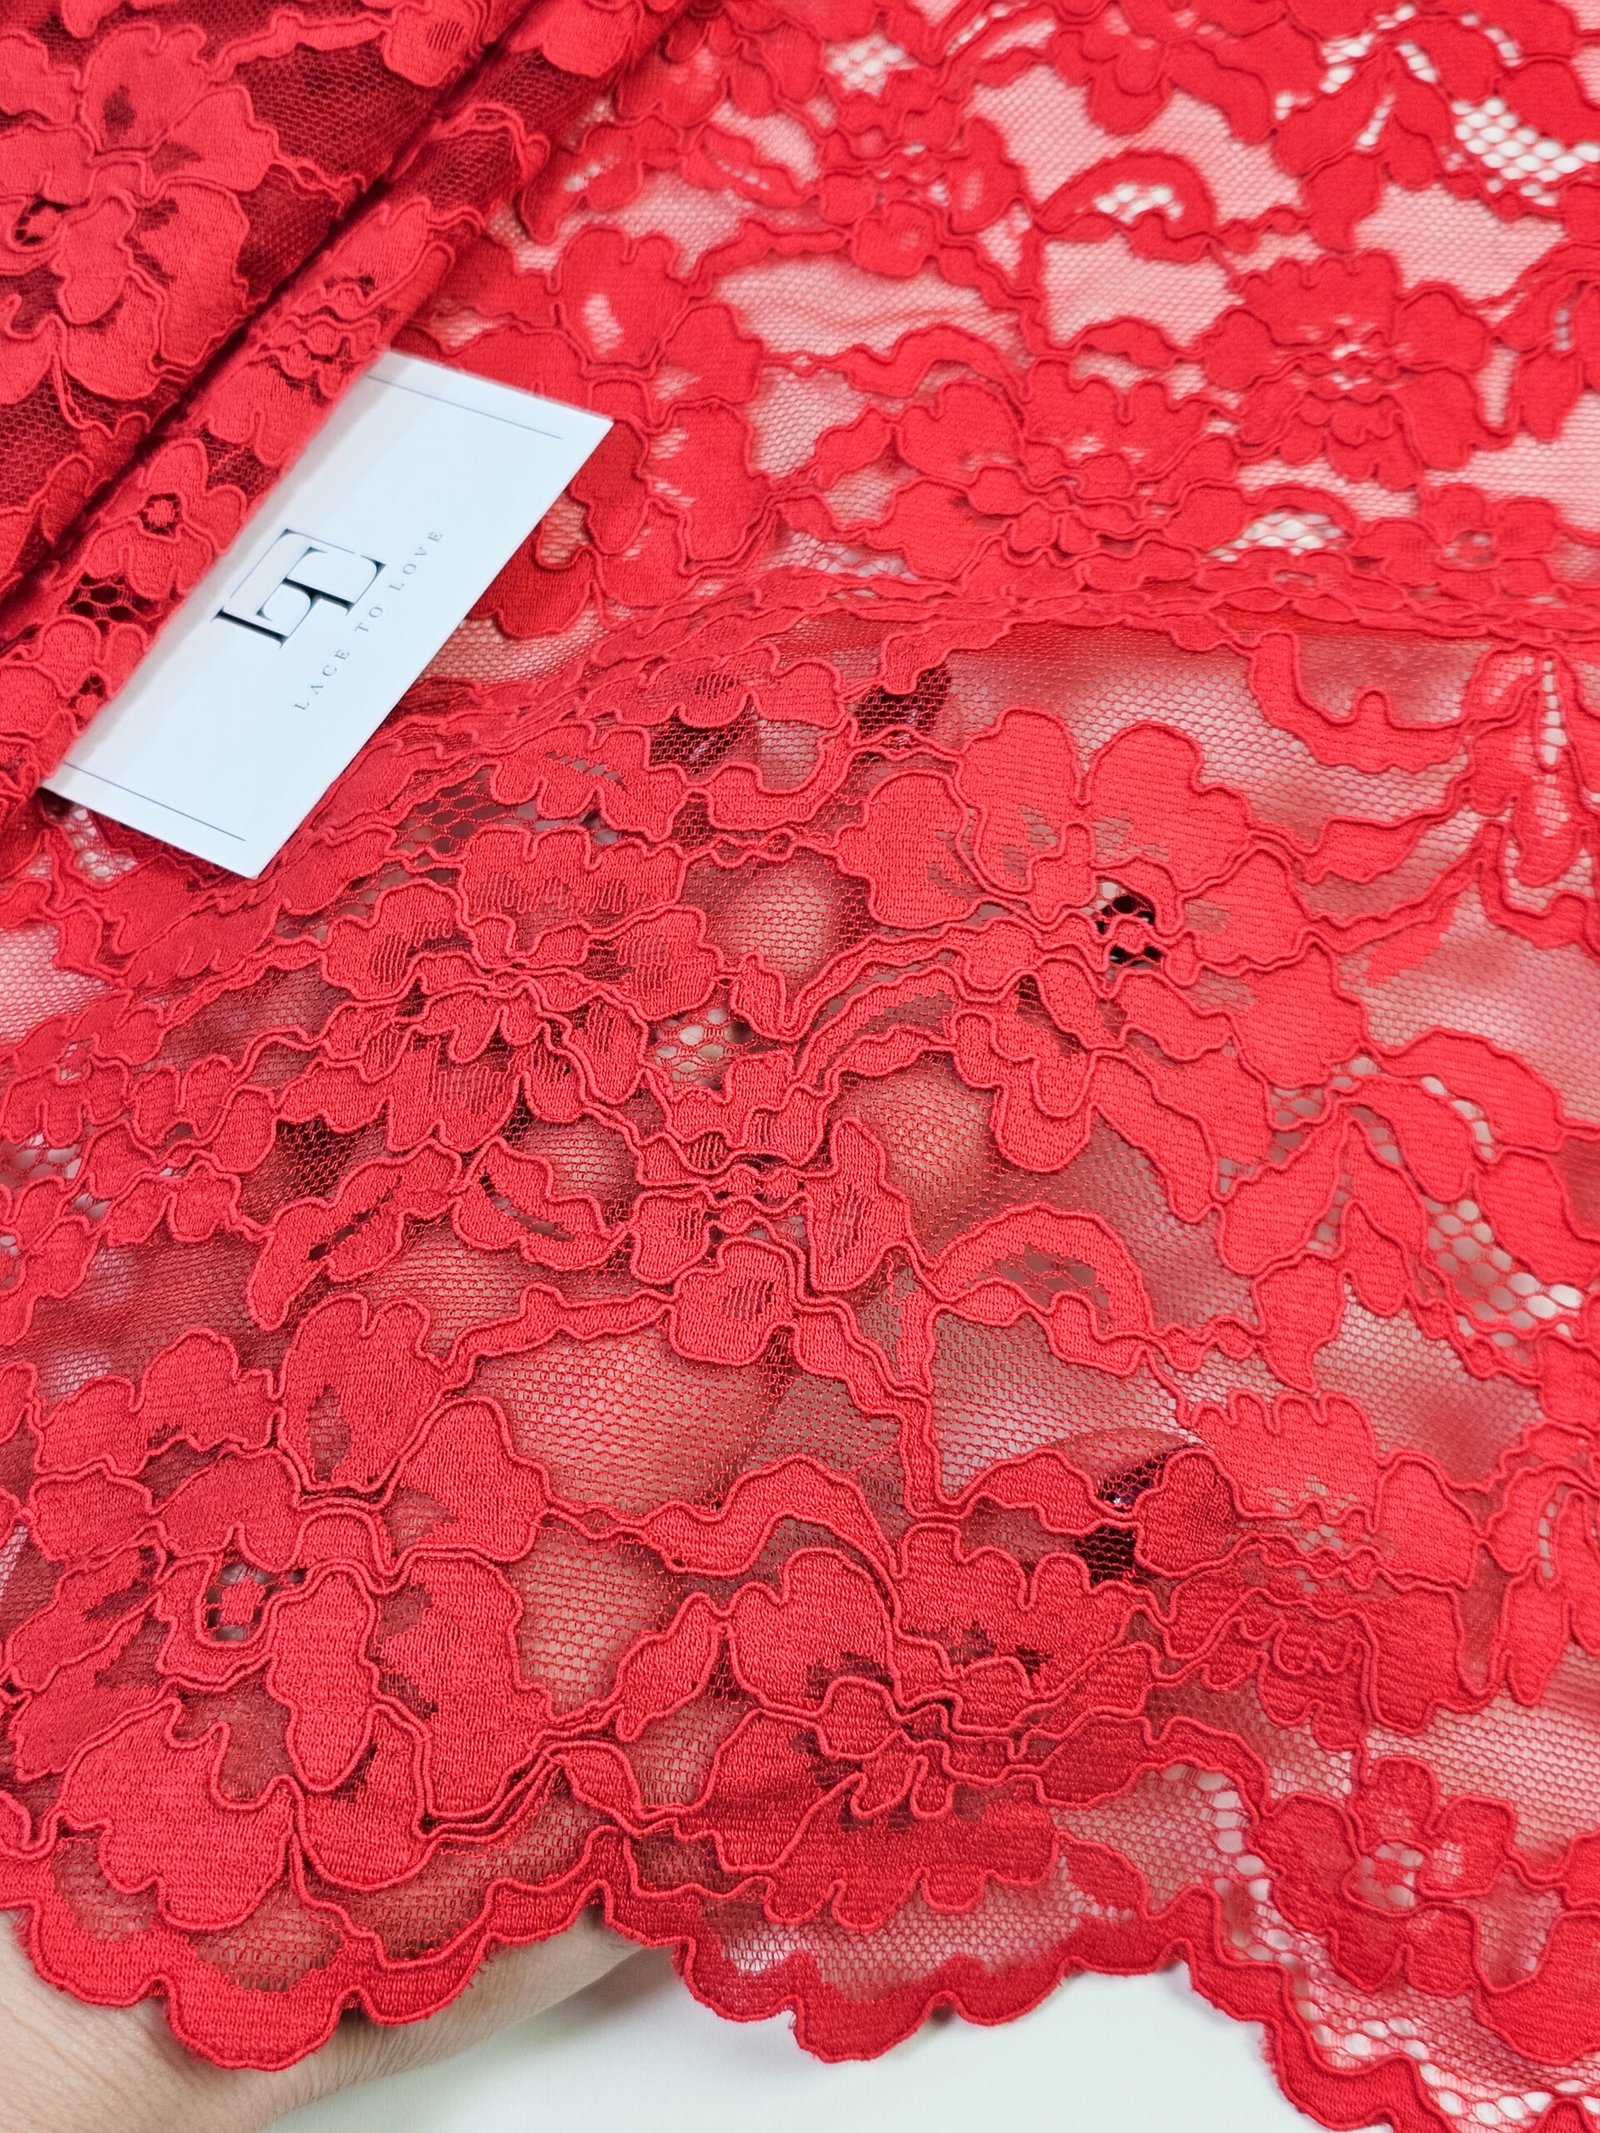 High quality dance dress lace fabric by the meter